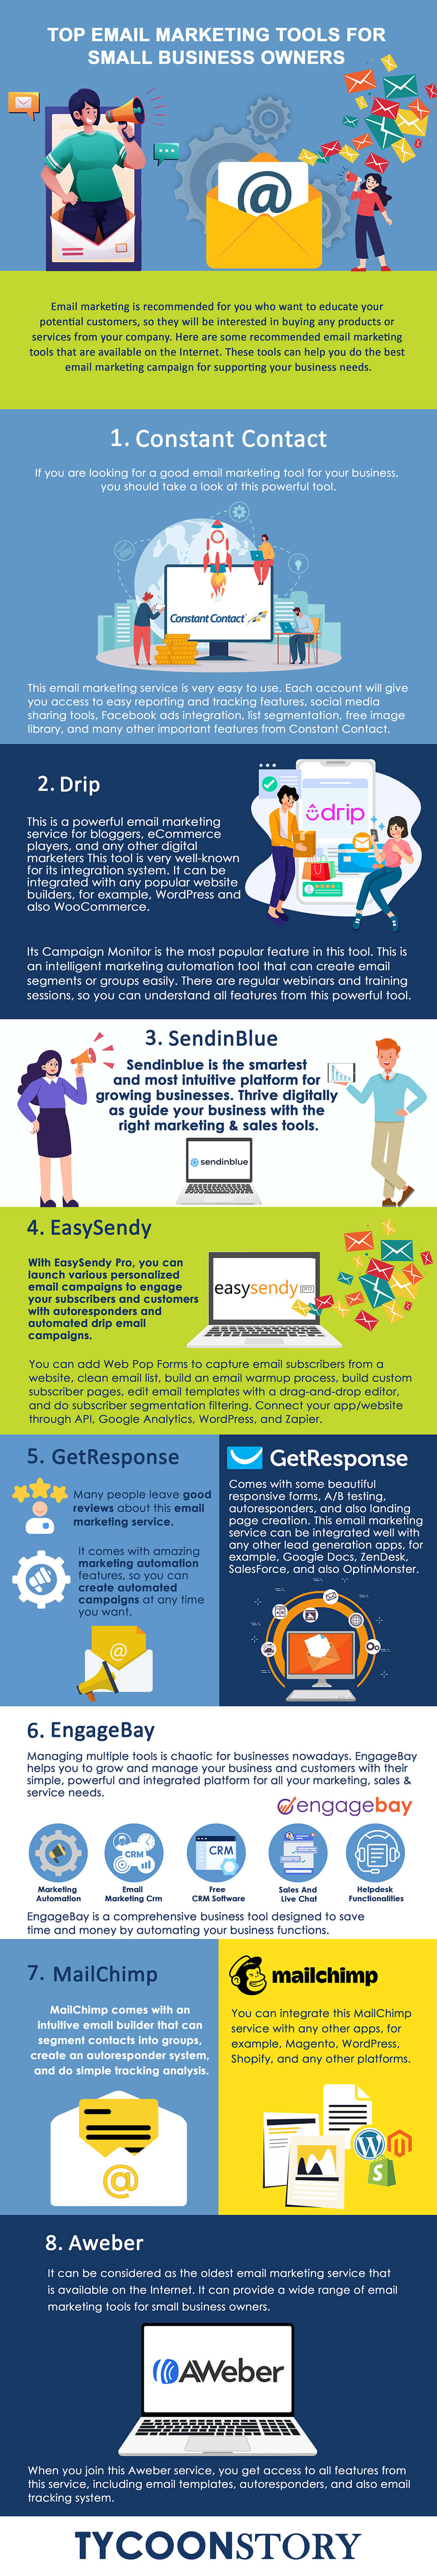 Top email marketing tools for small business owners infographic